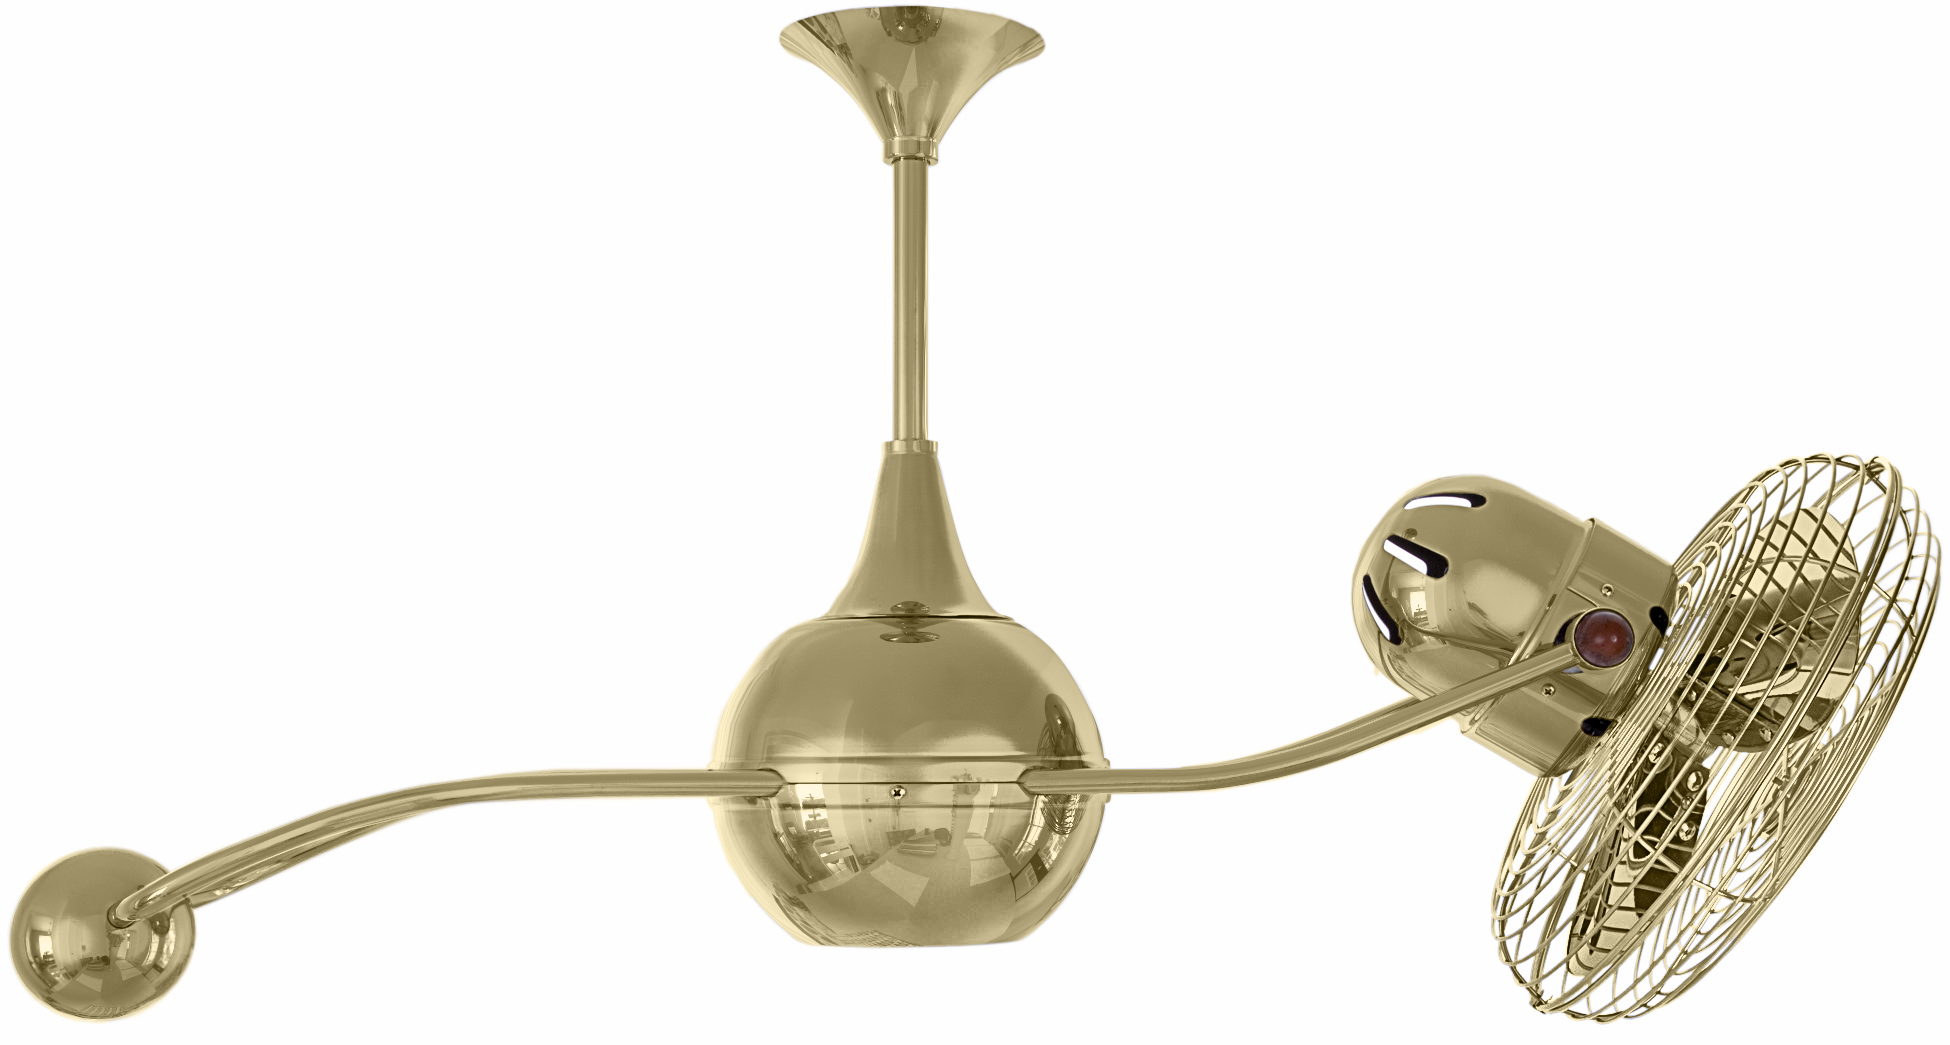 Brisa 2000 ceiling fan in Polished Brass finish with Metal Blades in safety cage made by Matthews Fan Company.